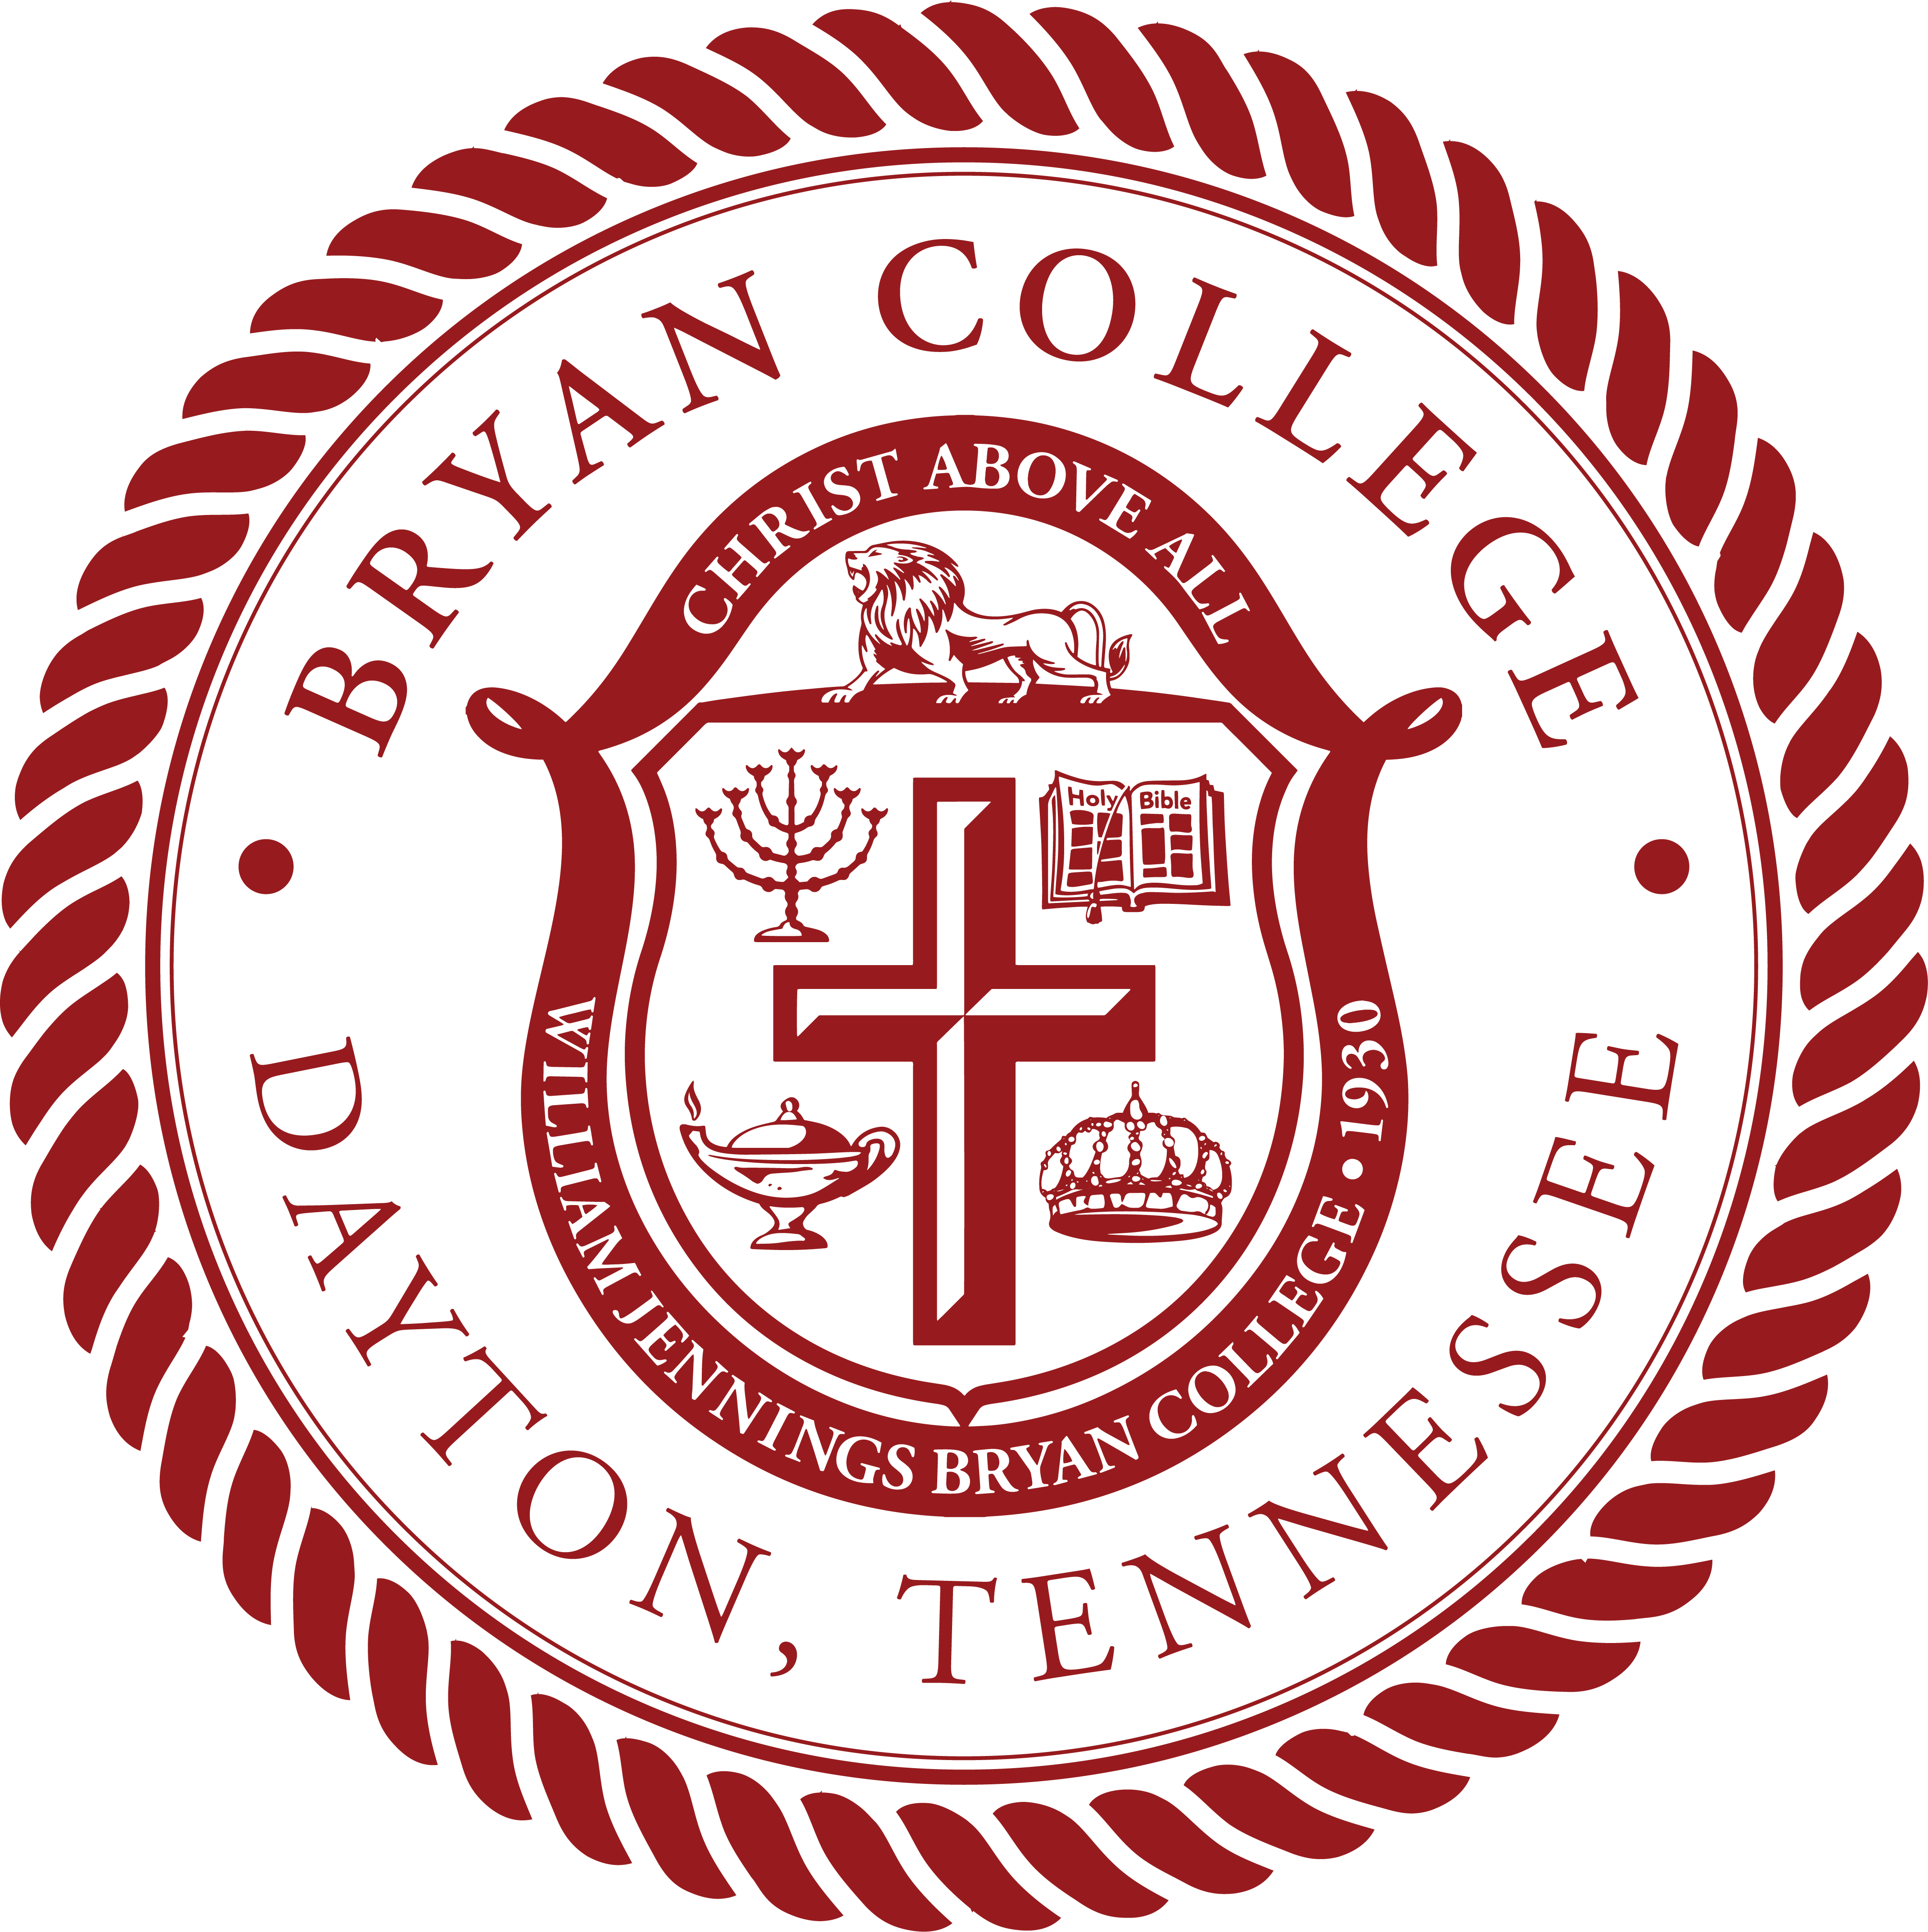 Bryan College - Degree Programs, Accreditation, Applying, Tuition,  Financial Aid - Best Degree Programs